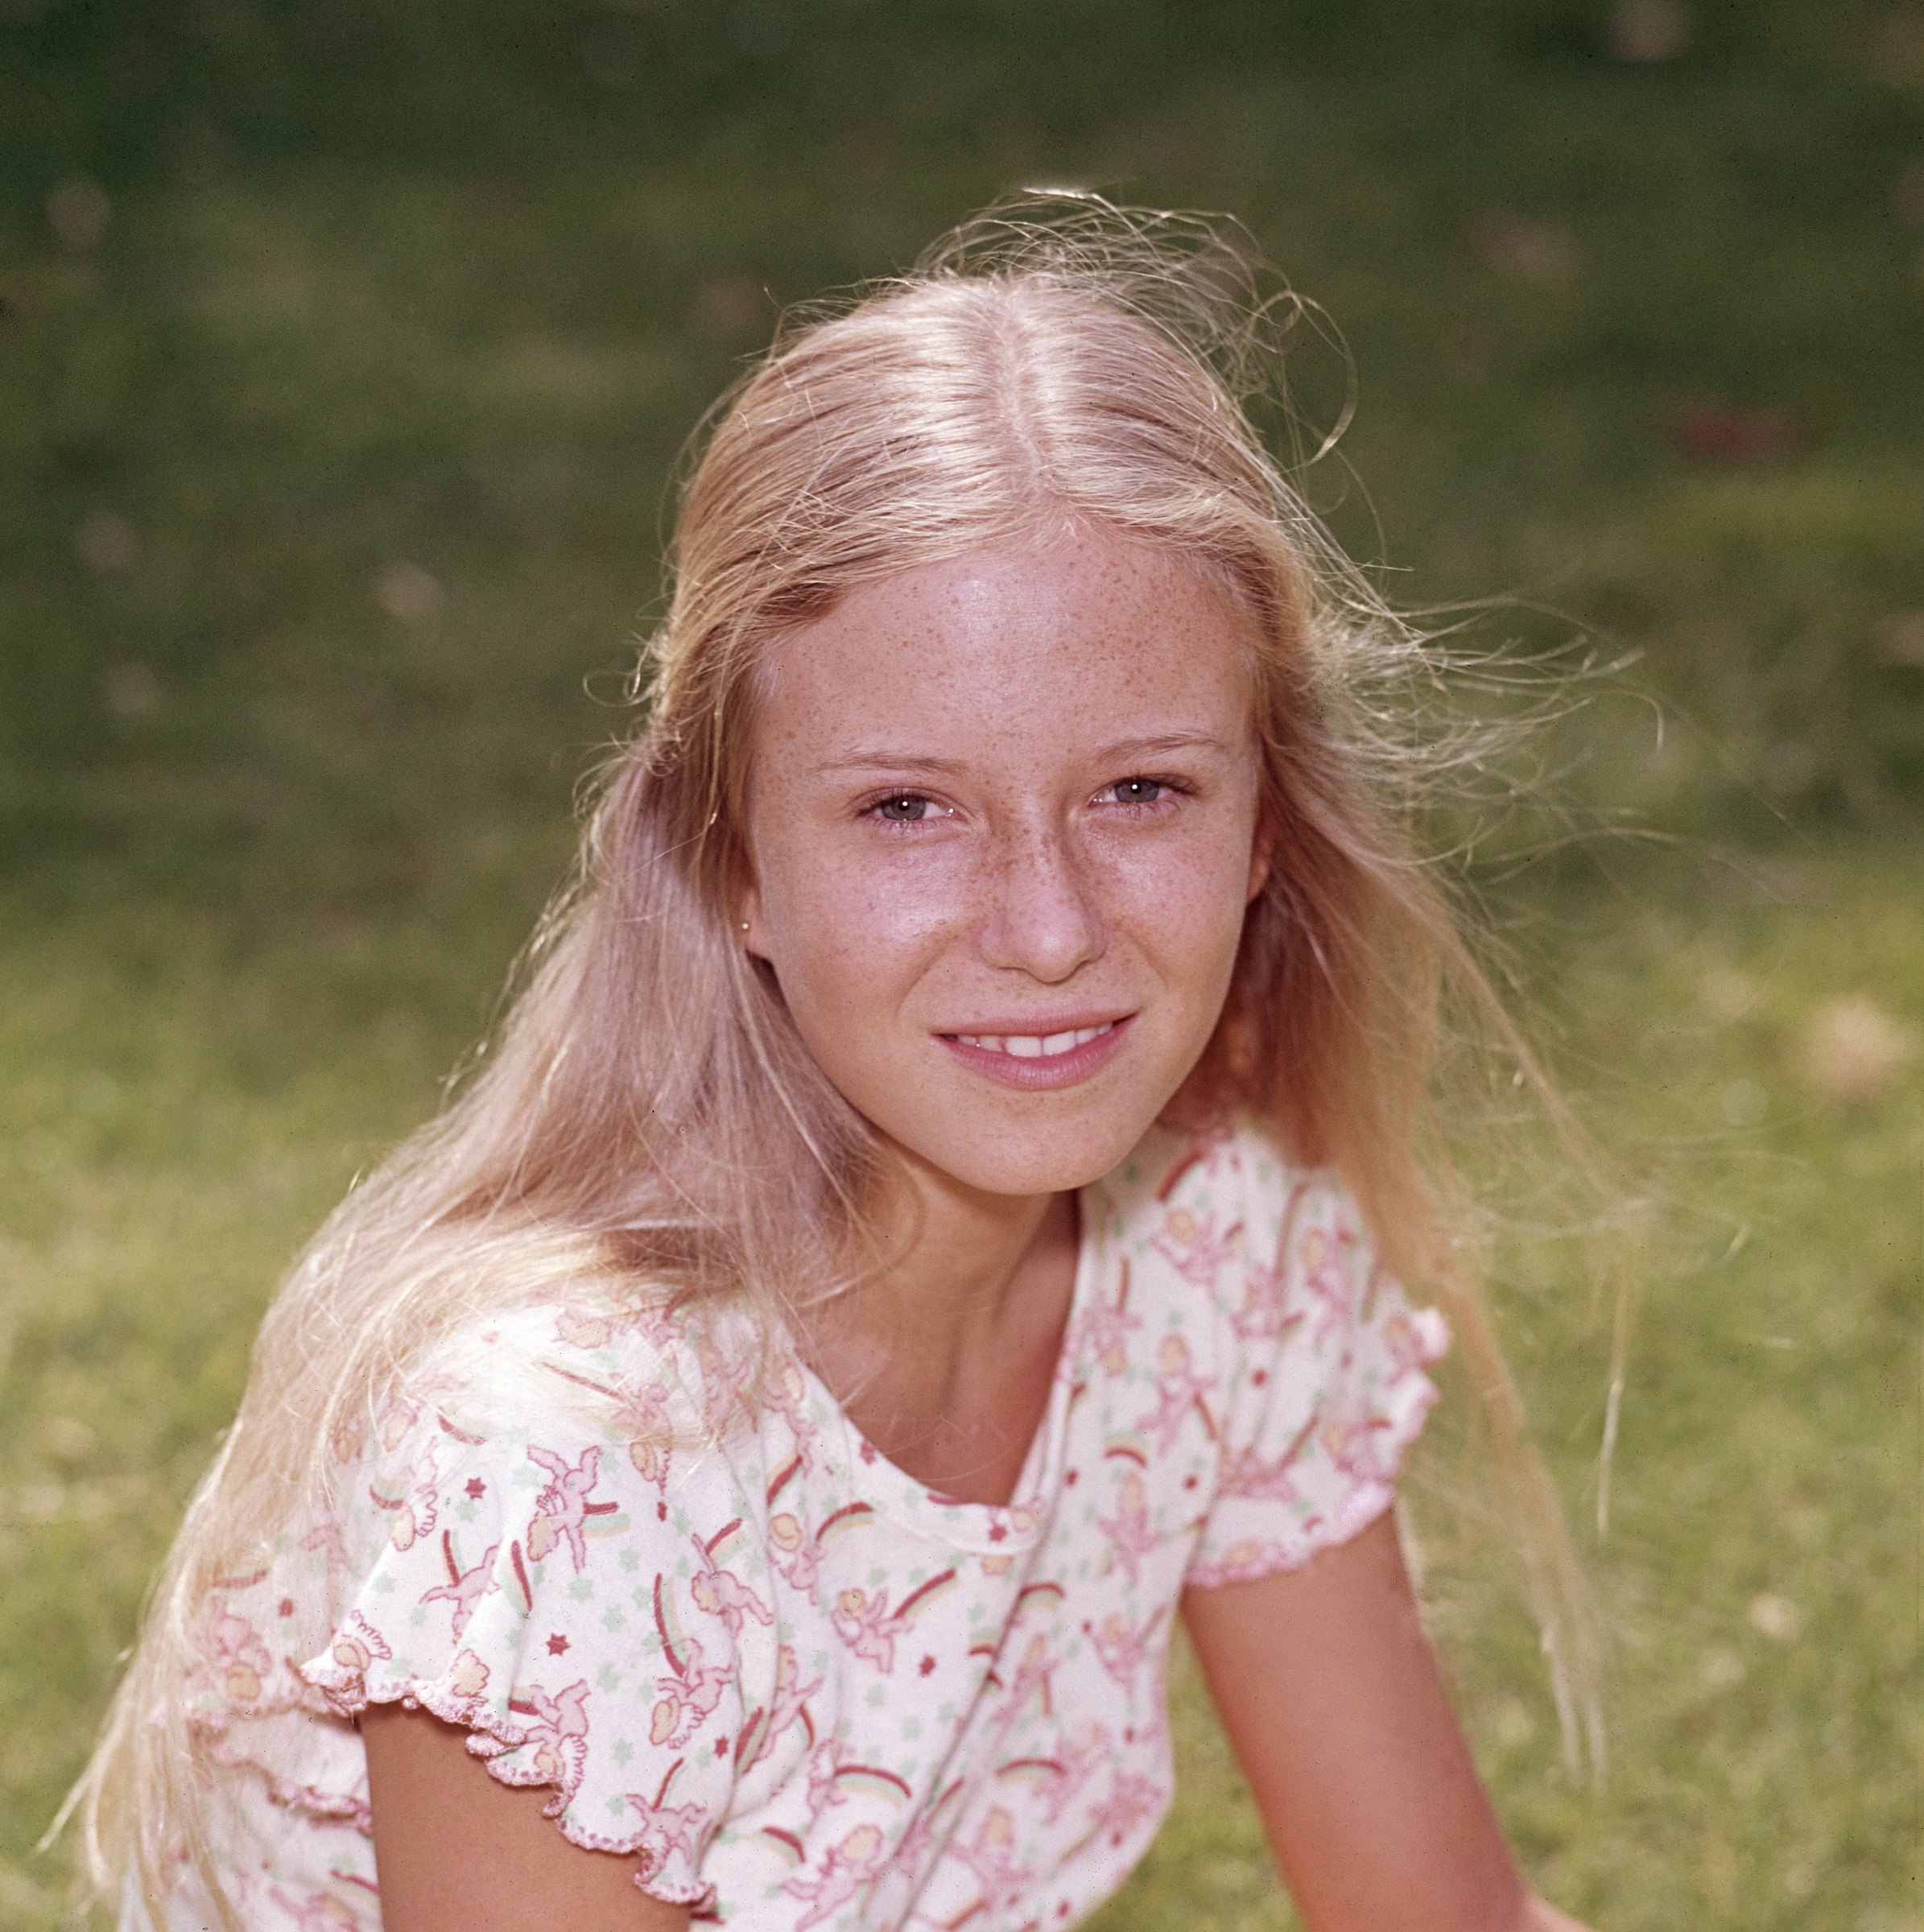 Eve Plumb as Jan Brady during Season 1 of "The Brady Bunch" on September 26, 1969 | Source: Getty Images